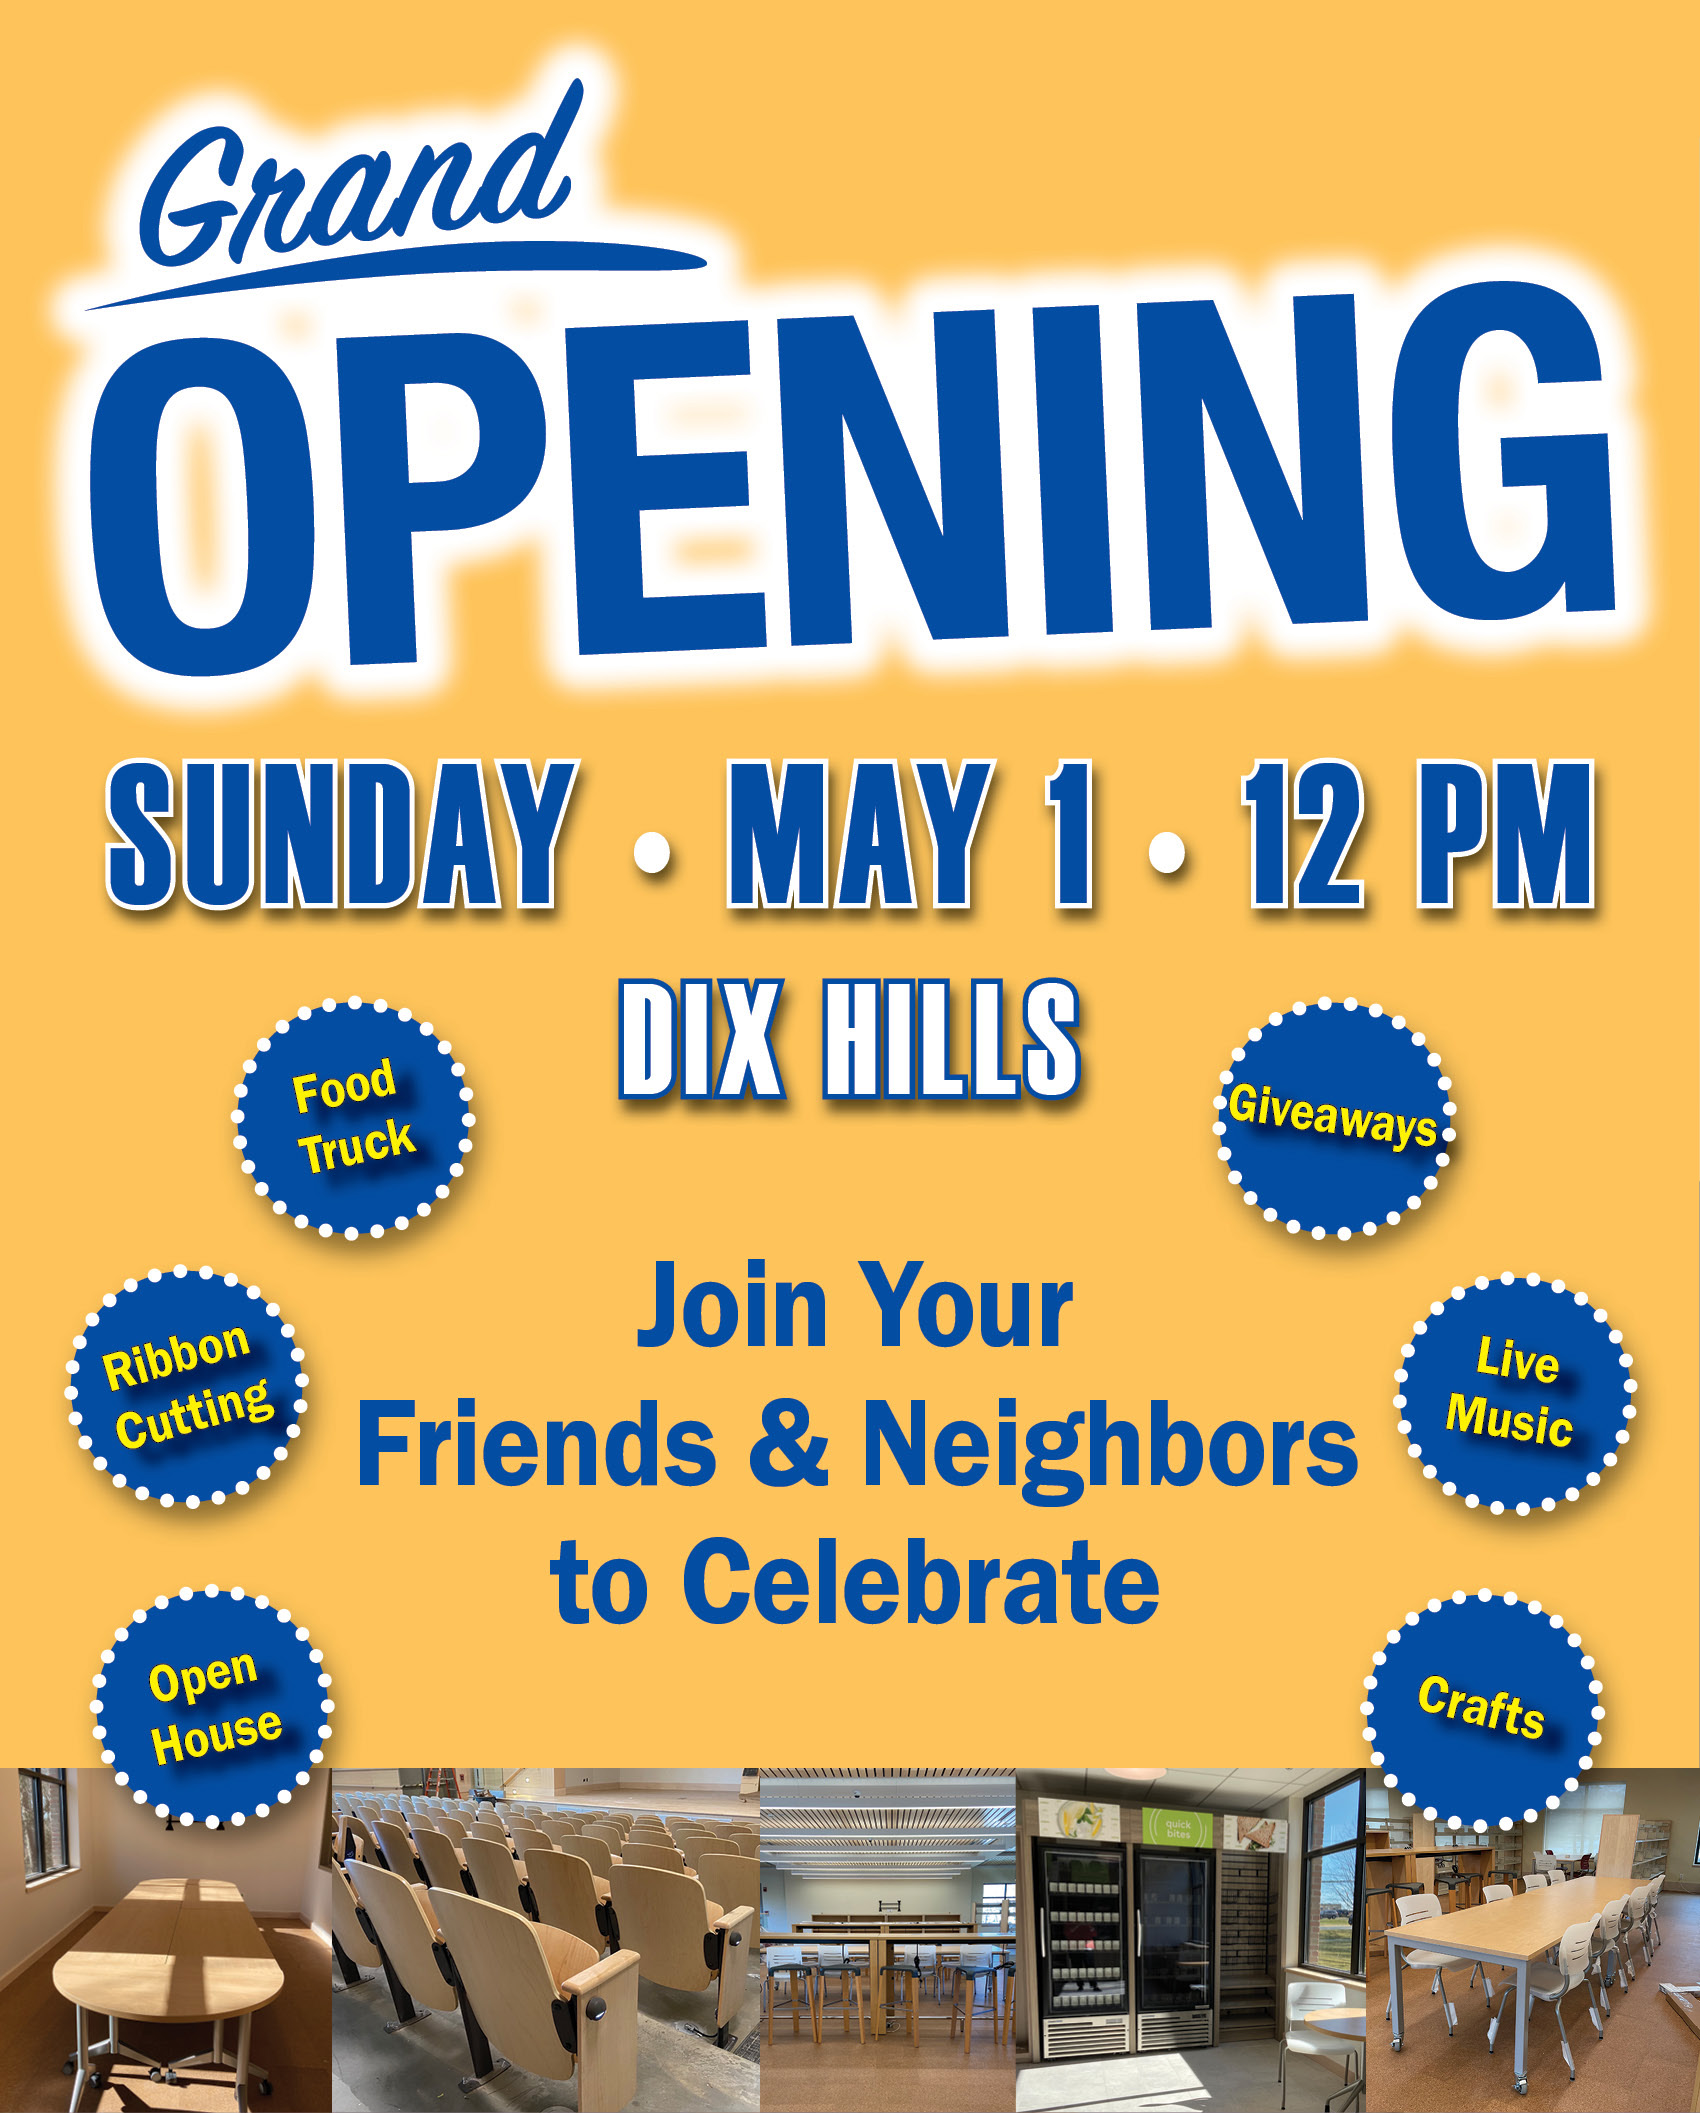 Graphic of the flier advertising the Library's Grand Opening stating "join your friends and neighbors to celebrate: There are little circles on the page with an activity that we will have listed like Food Truck, Ribbon cutting, open house, giveaways, live music, crafts!